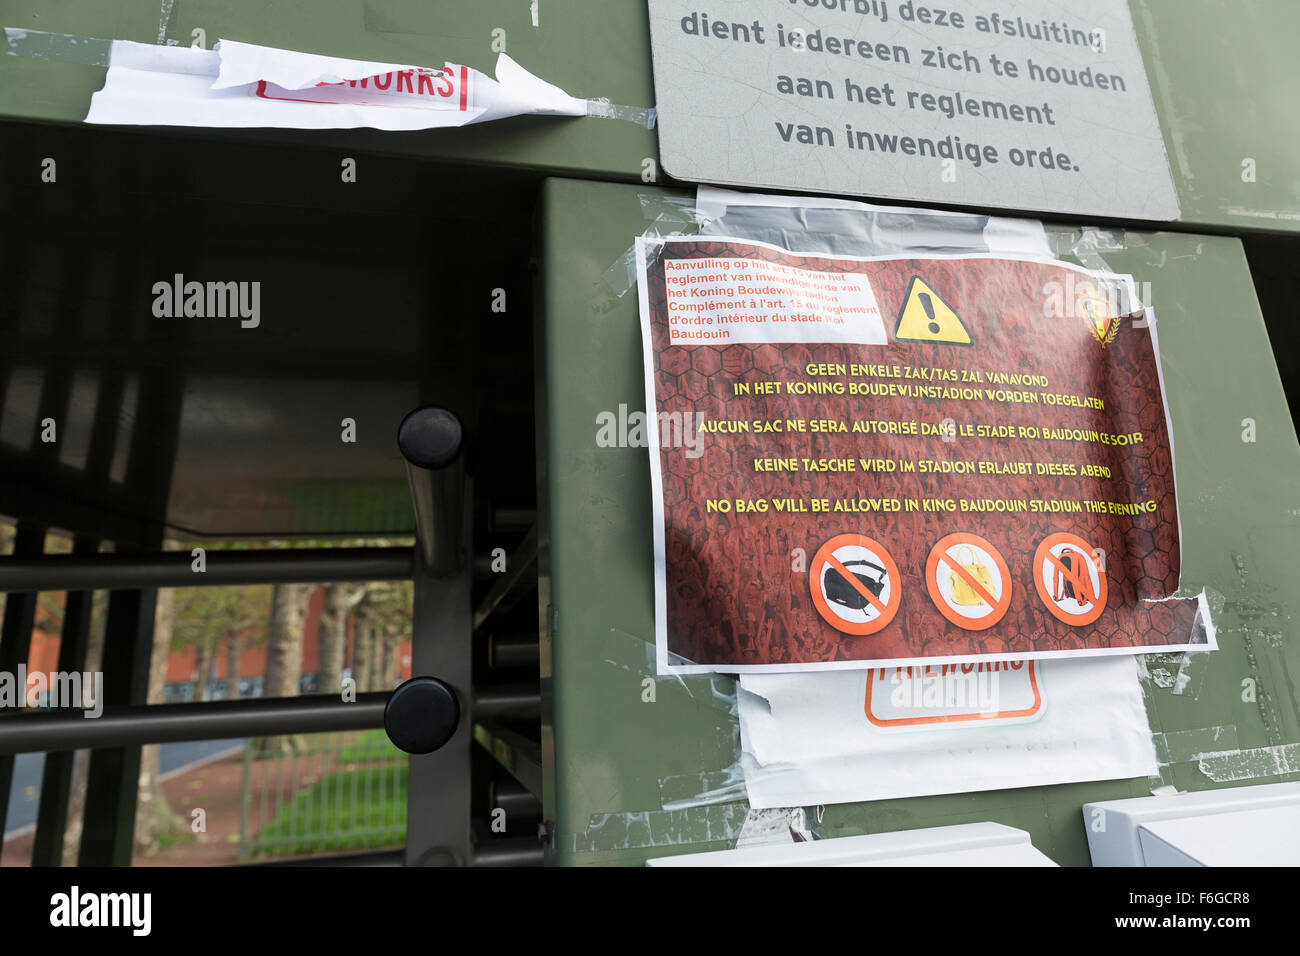 Brussels, Belgium. 17th Nov, 2015. Security instructions at an entrance of the Roi Baudouin stadium in Brussels, Belgium, 17 November 2015. A friendly soccer match between Belgium and Spain was due to be played at the stadium on Tuesday but was cancelled due to security concerns following the Paris terrorist attacks on 13 November. Photo: Thierry Monasse/dpa/Alamy Live News Stock Photo